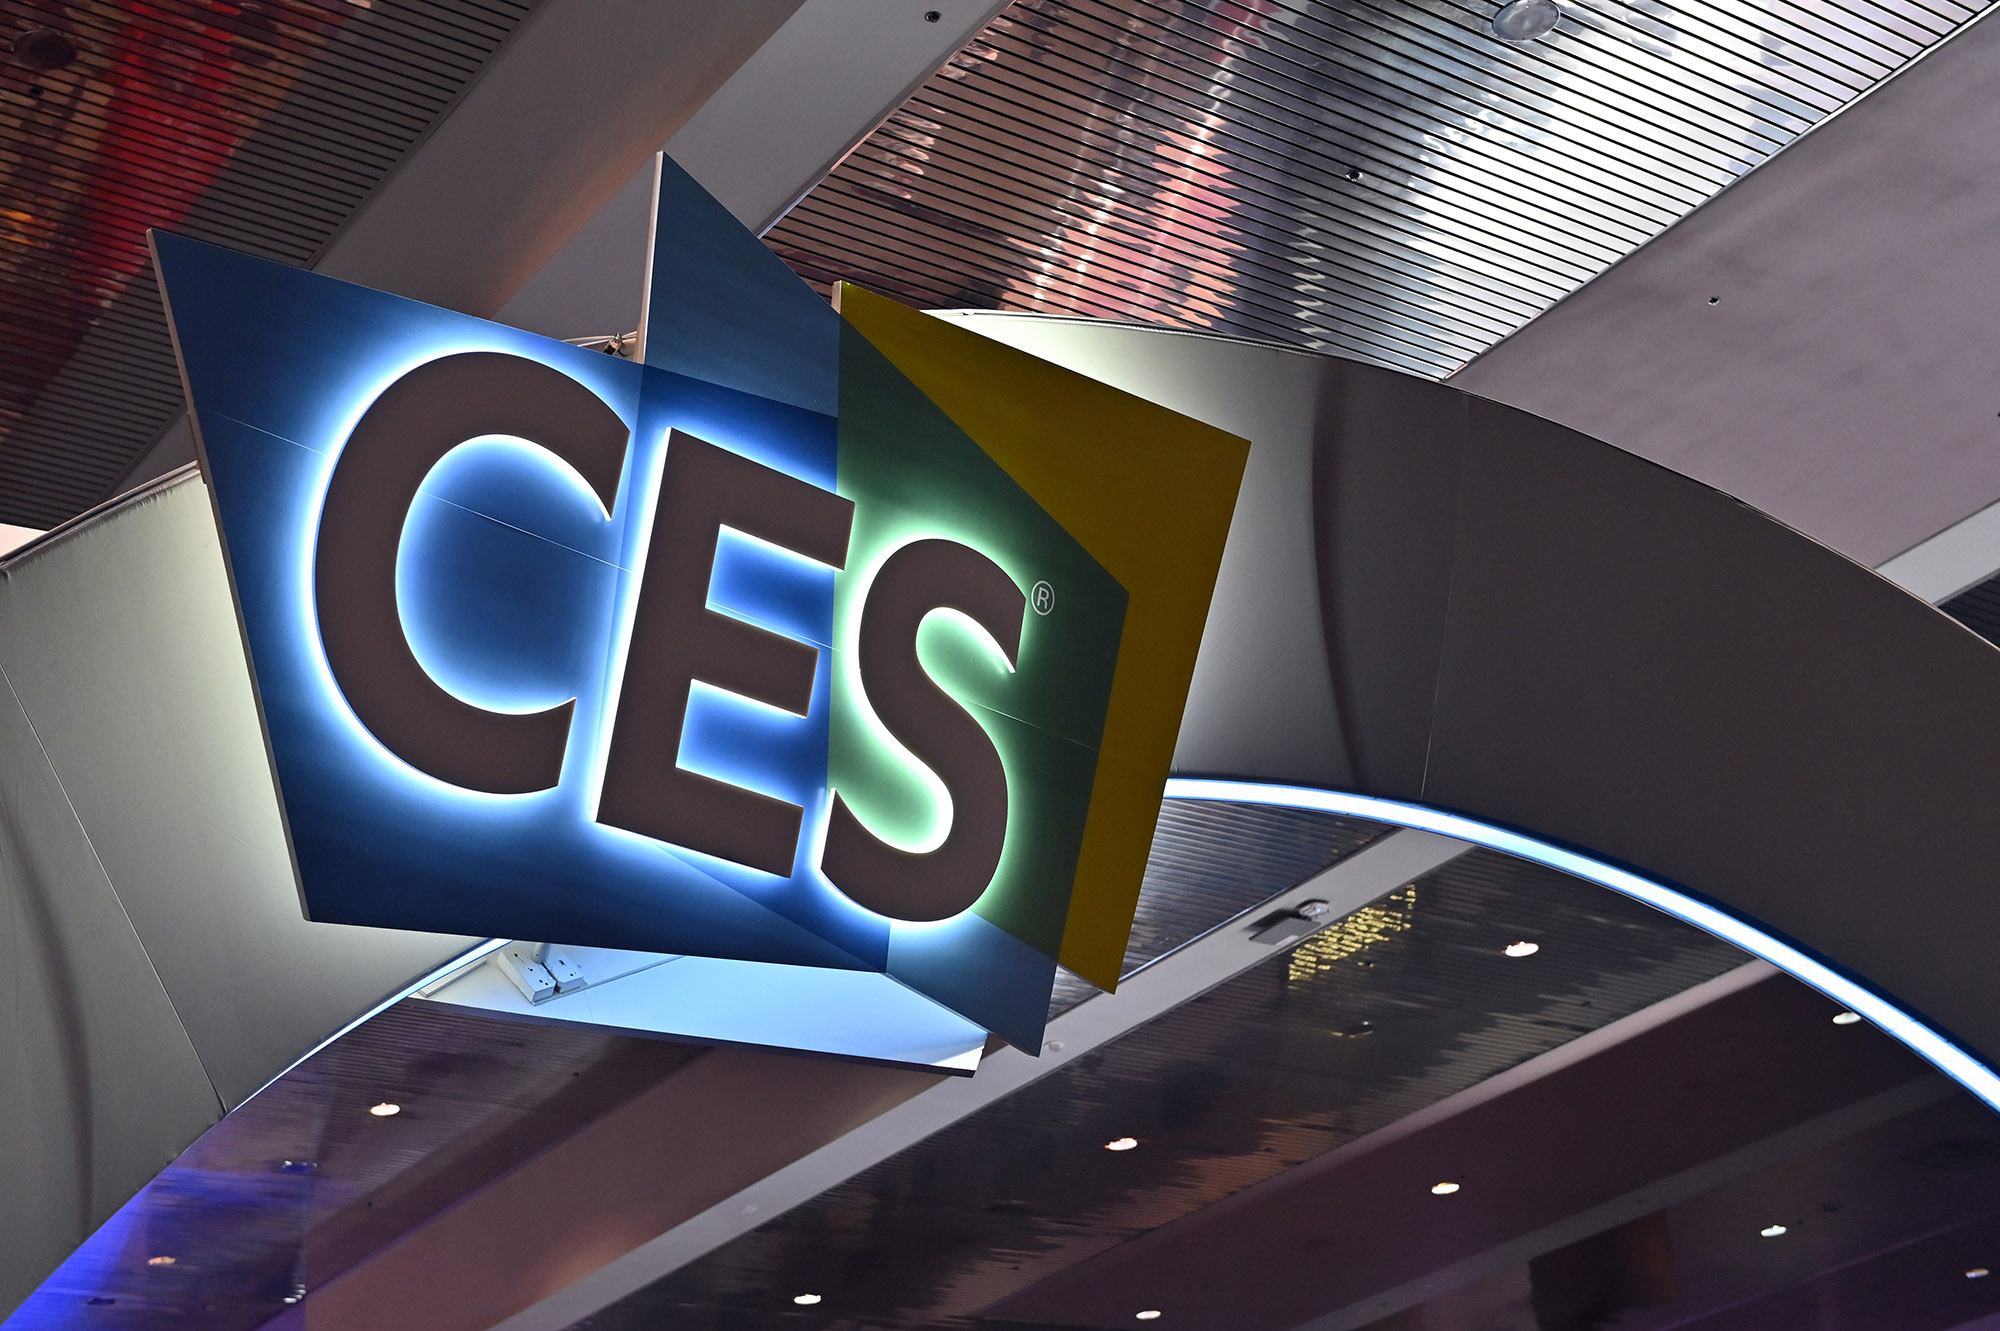 CES logo on archway at CES Las Vegas.